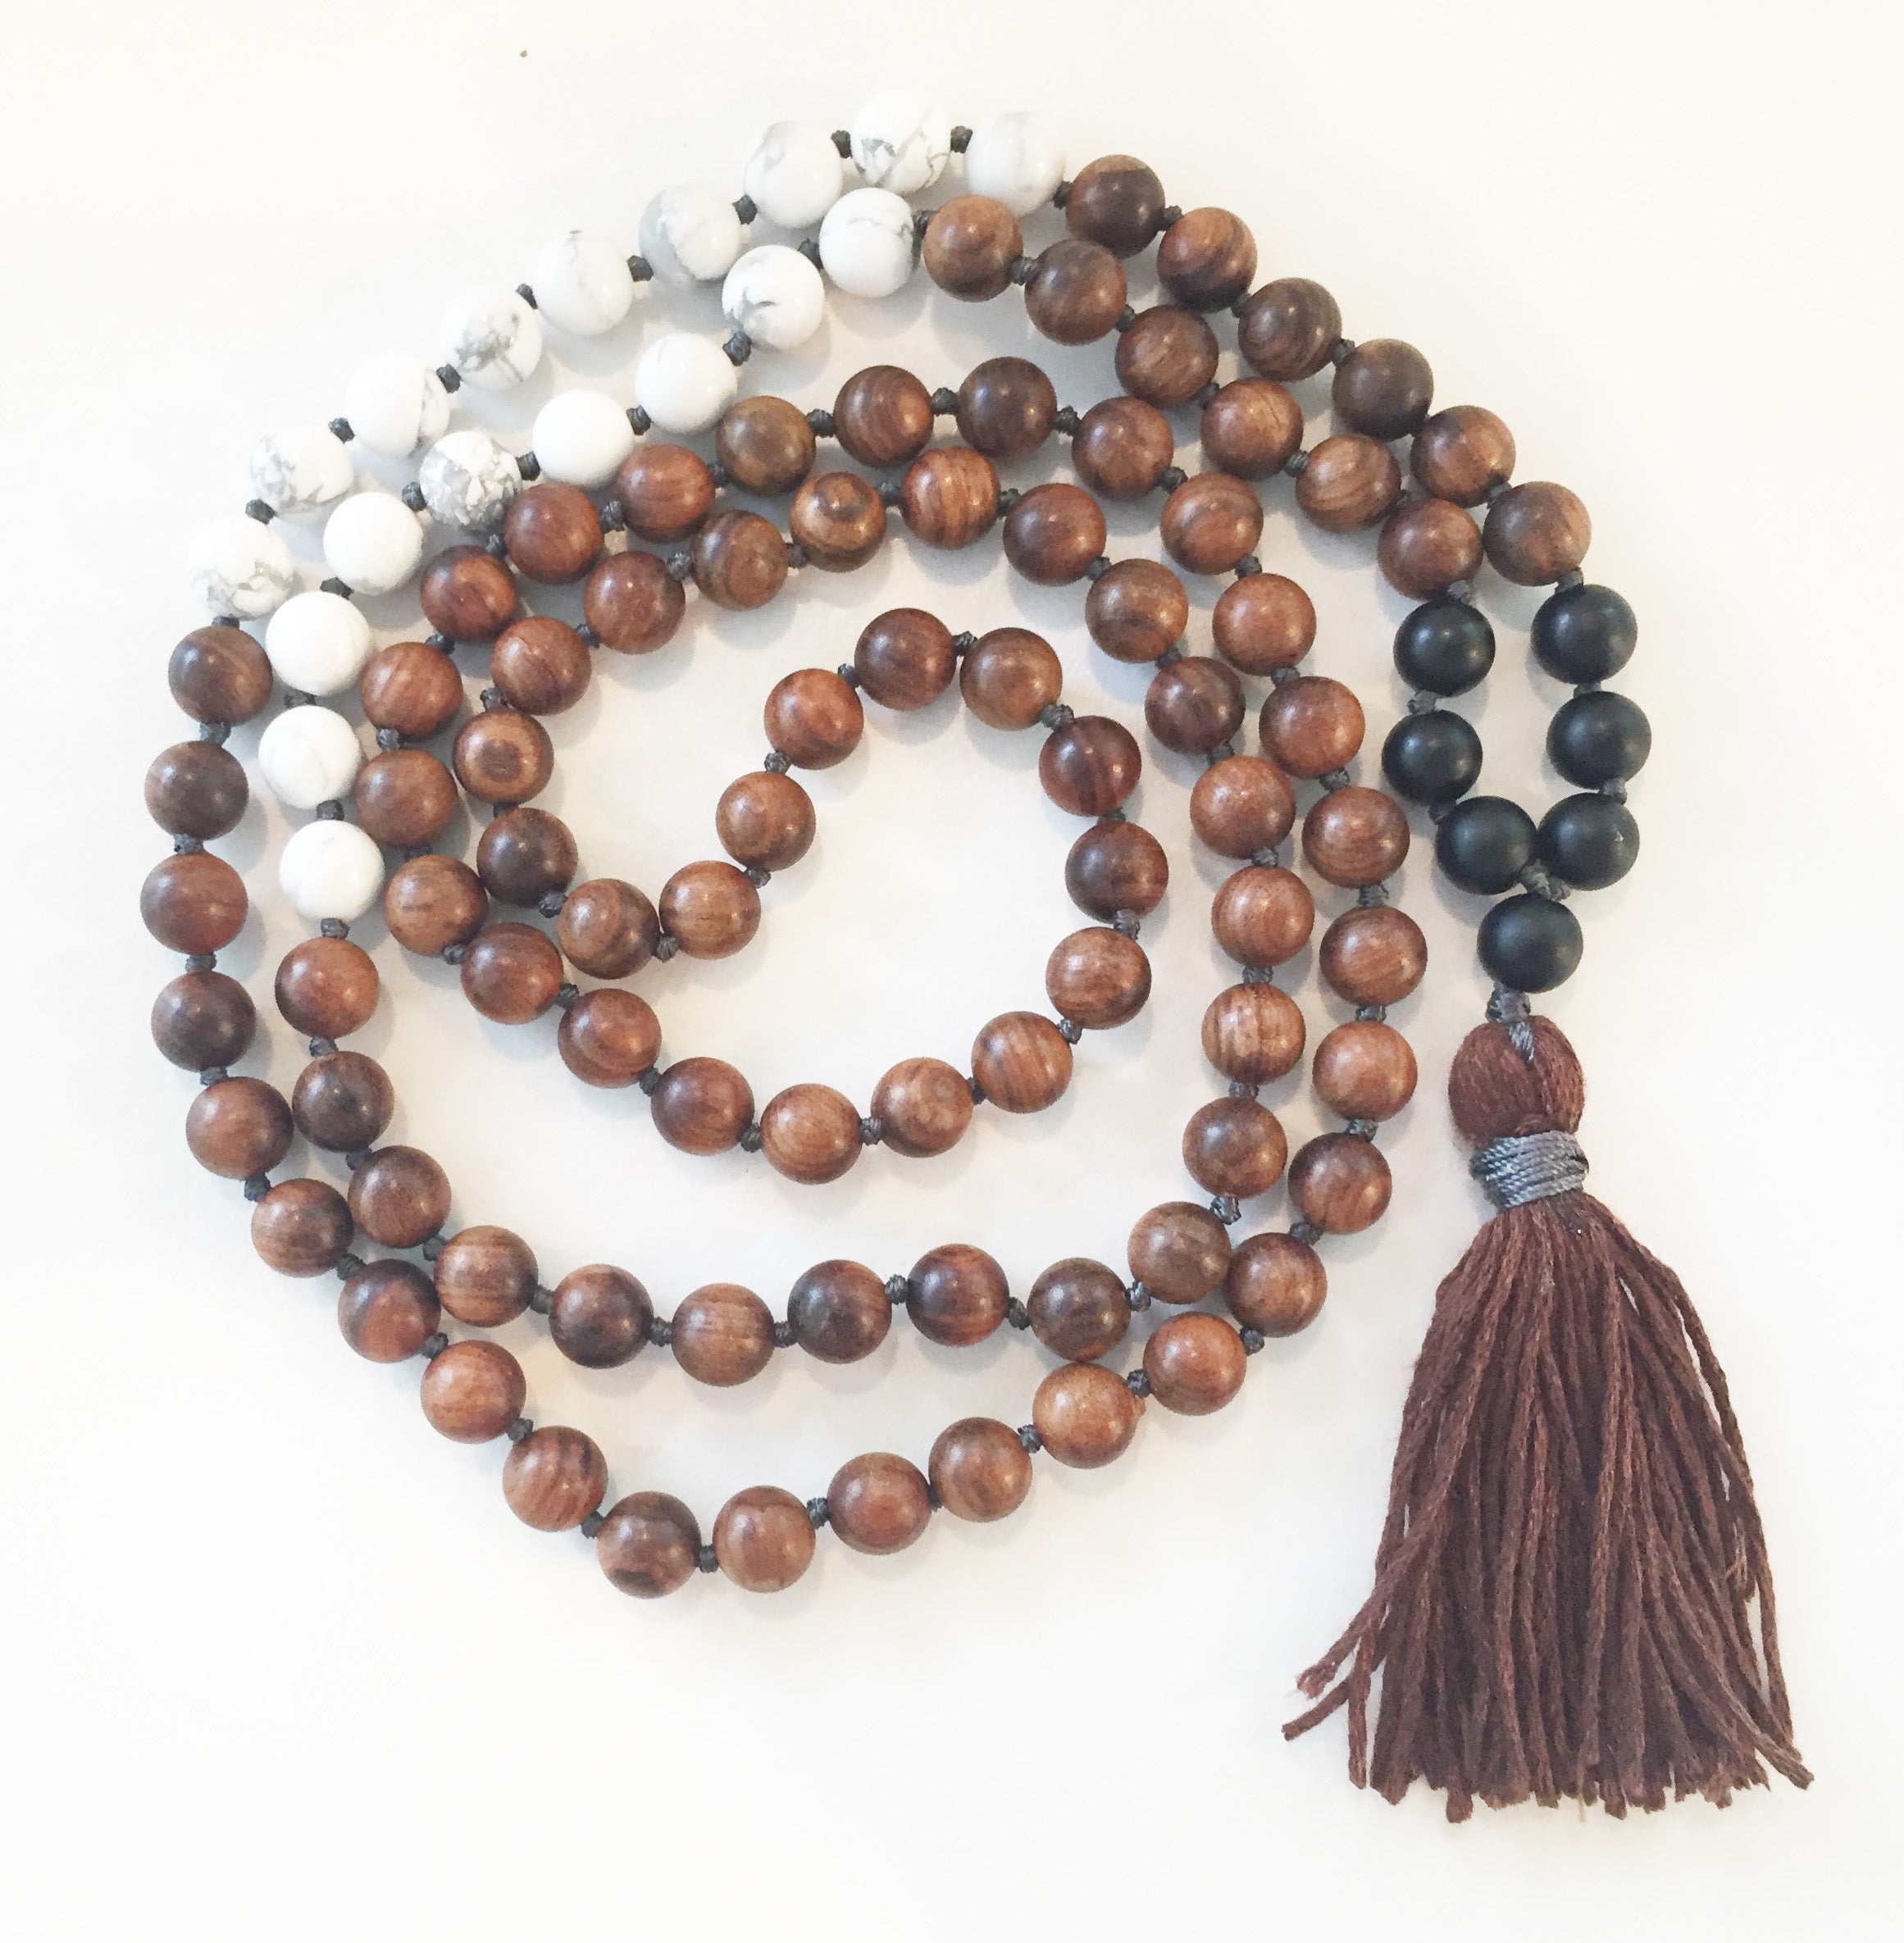 8mm Pear Wood & Howlite 108 Knotted Mala Necklace with Colored Tassel